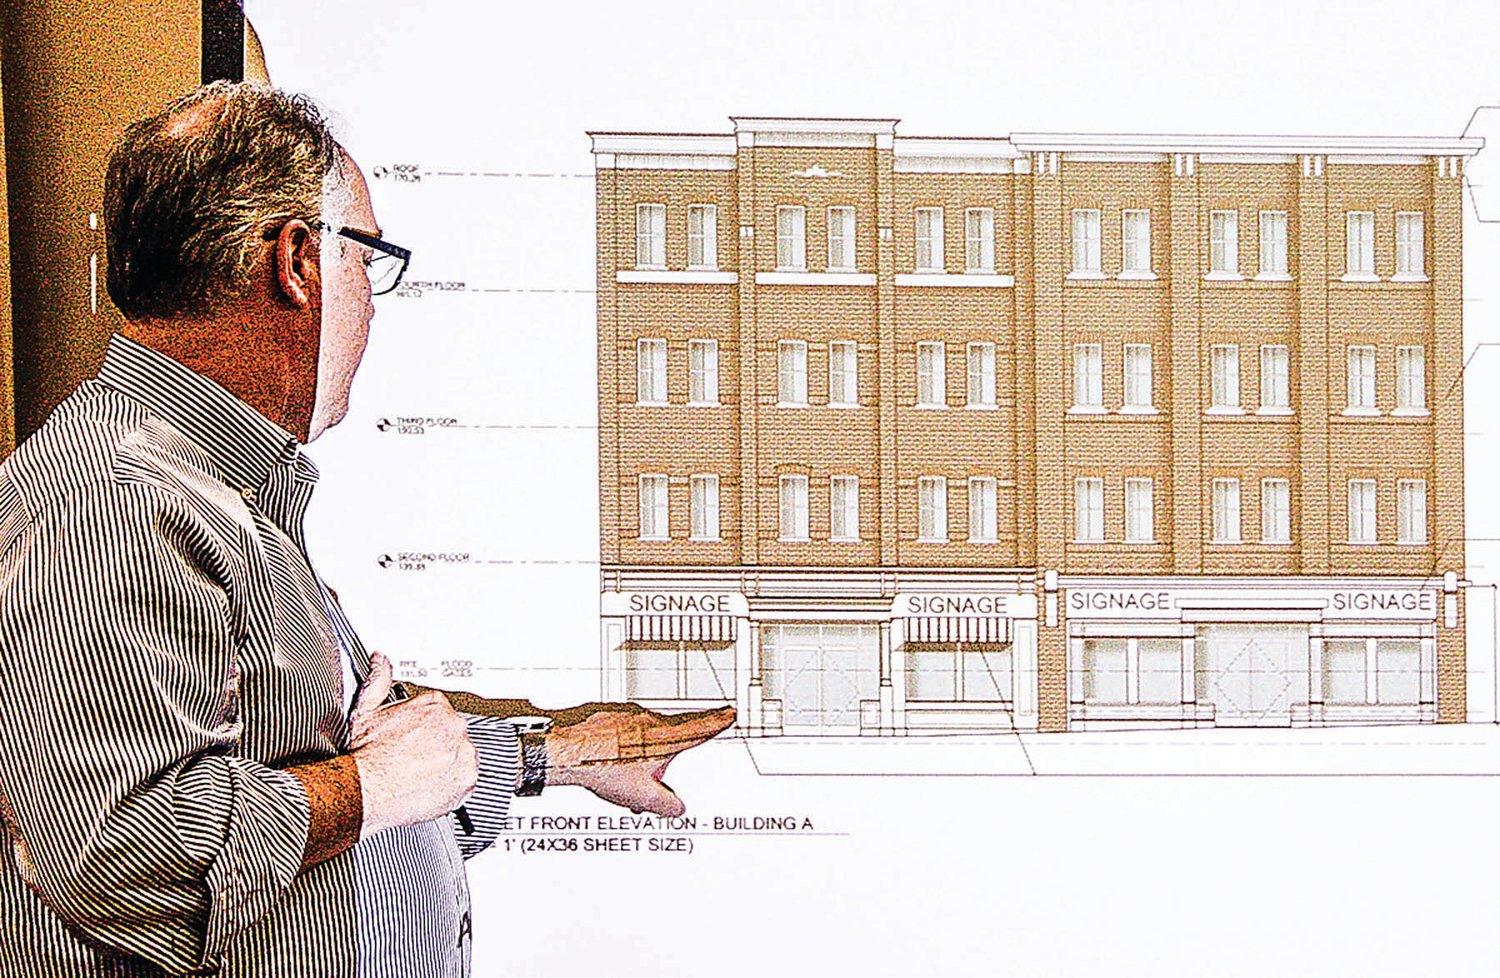 “A gift to Frenchtown” will grace Bridge Street. The top three floors will be apartments with retail on the ground floor. It will fit between the Frenchtown Inn and the Odd Fellows building. That’s architect Ralph Fey on the left.“A gift to Frenchtown” will grace Bridge Street. The top three floors will be apartments with retail on the ground floor. It will fit between the Frenchtown Inn and the Odd Fellows building. That’s architect Ralph Fey on the left. Photograph by Rick Epstein.